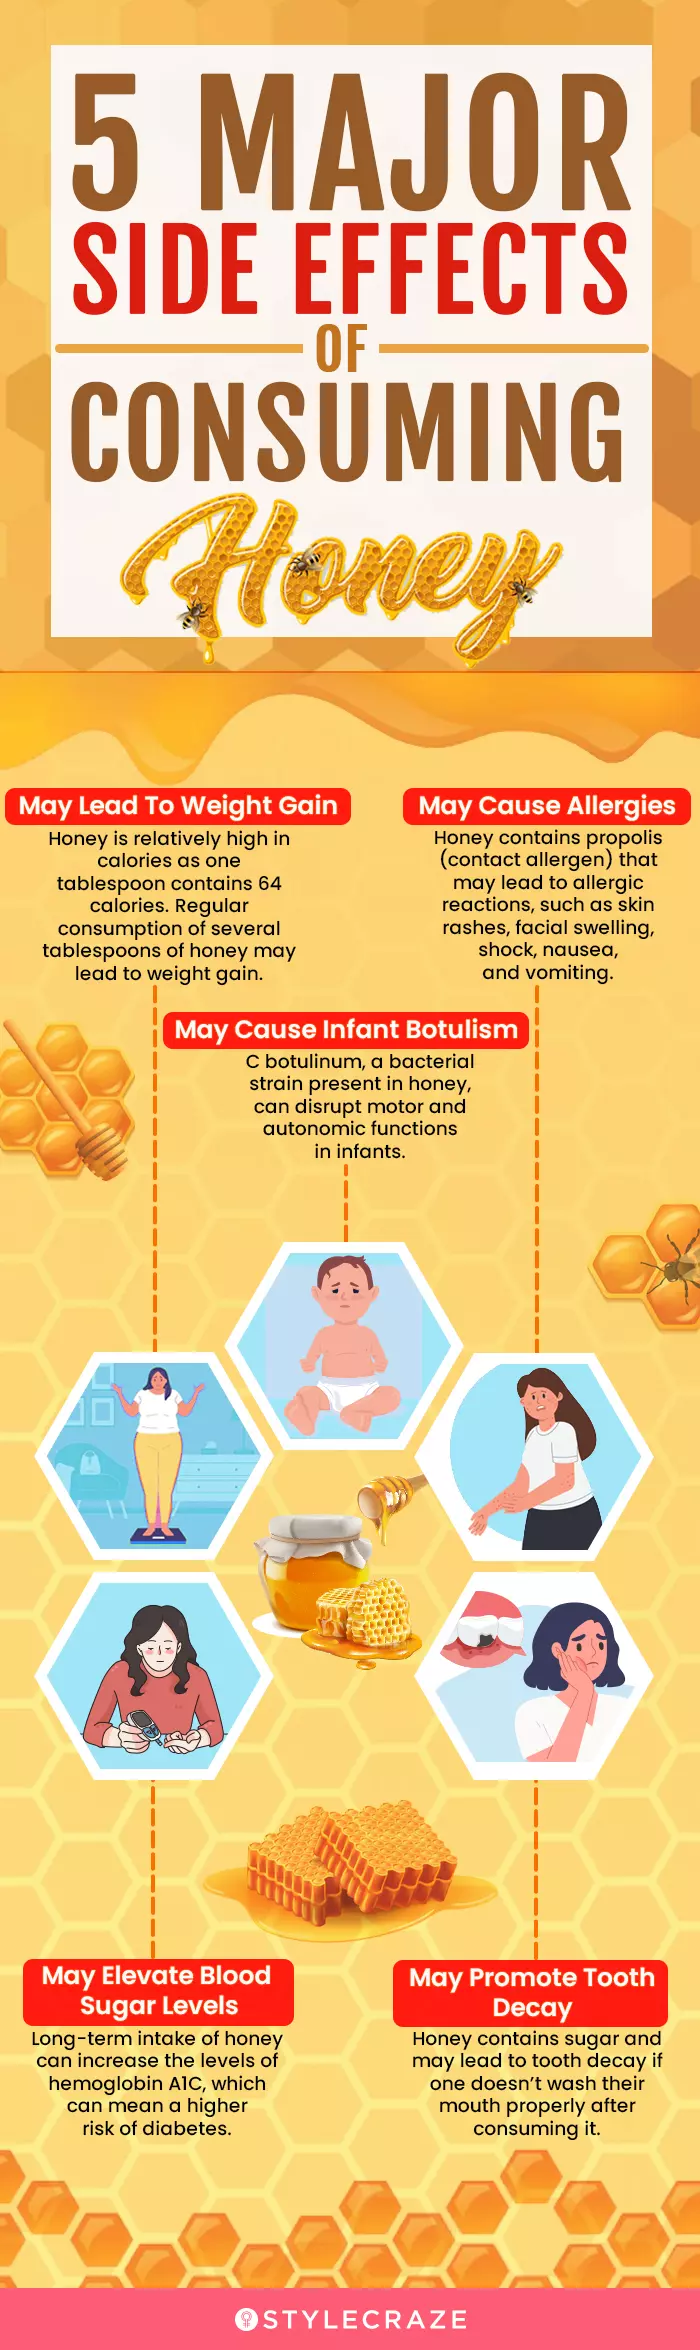 5 major side effects of consuming honey (infographic)